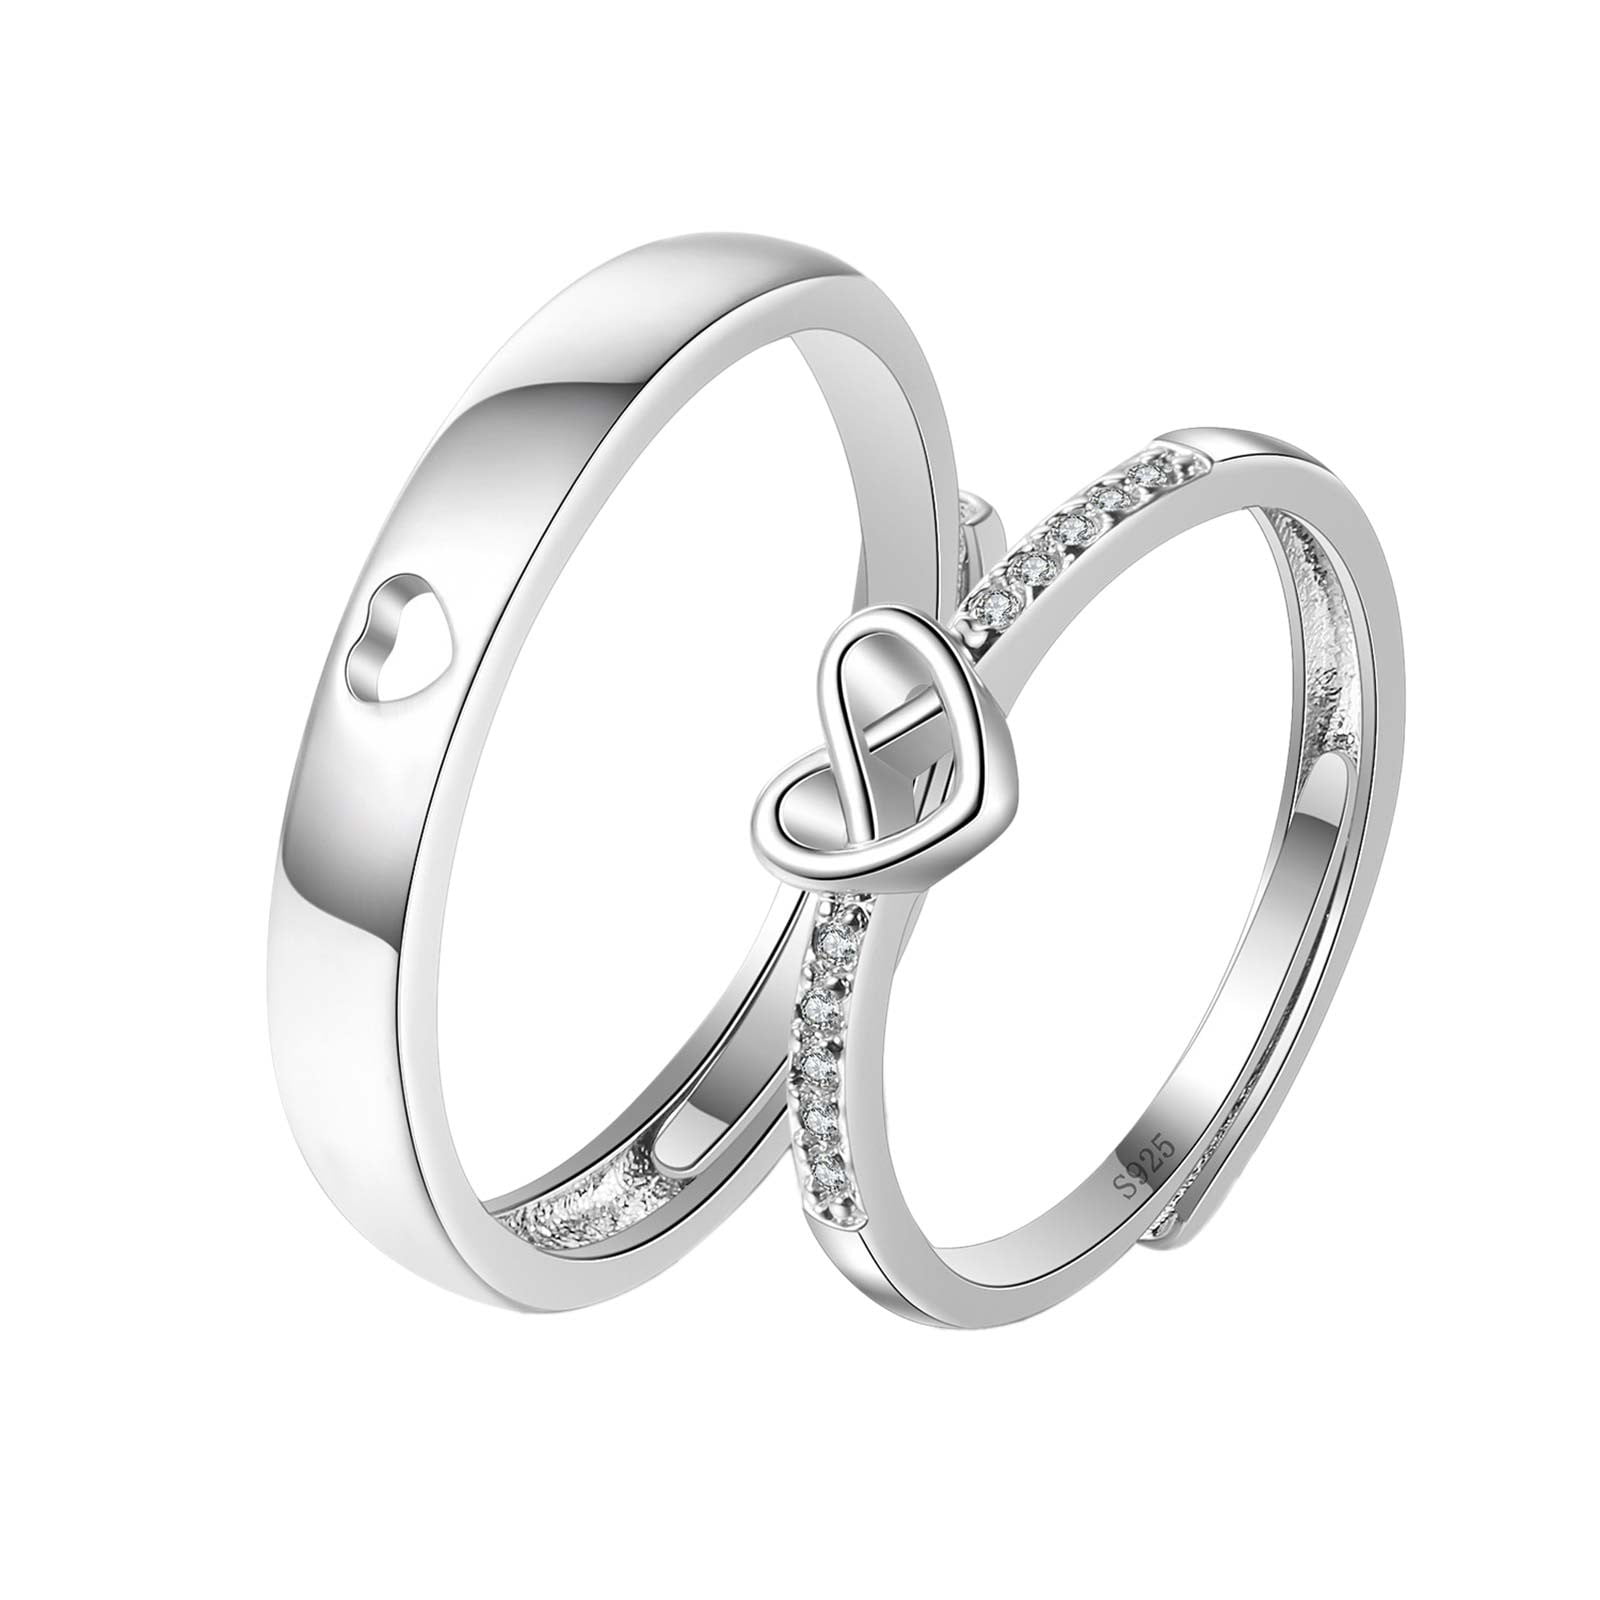 where to get couple rings in st - Lemon8 Search